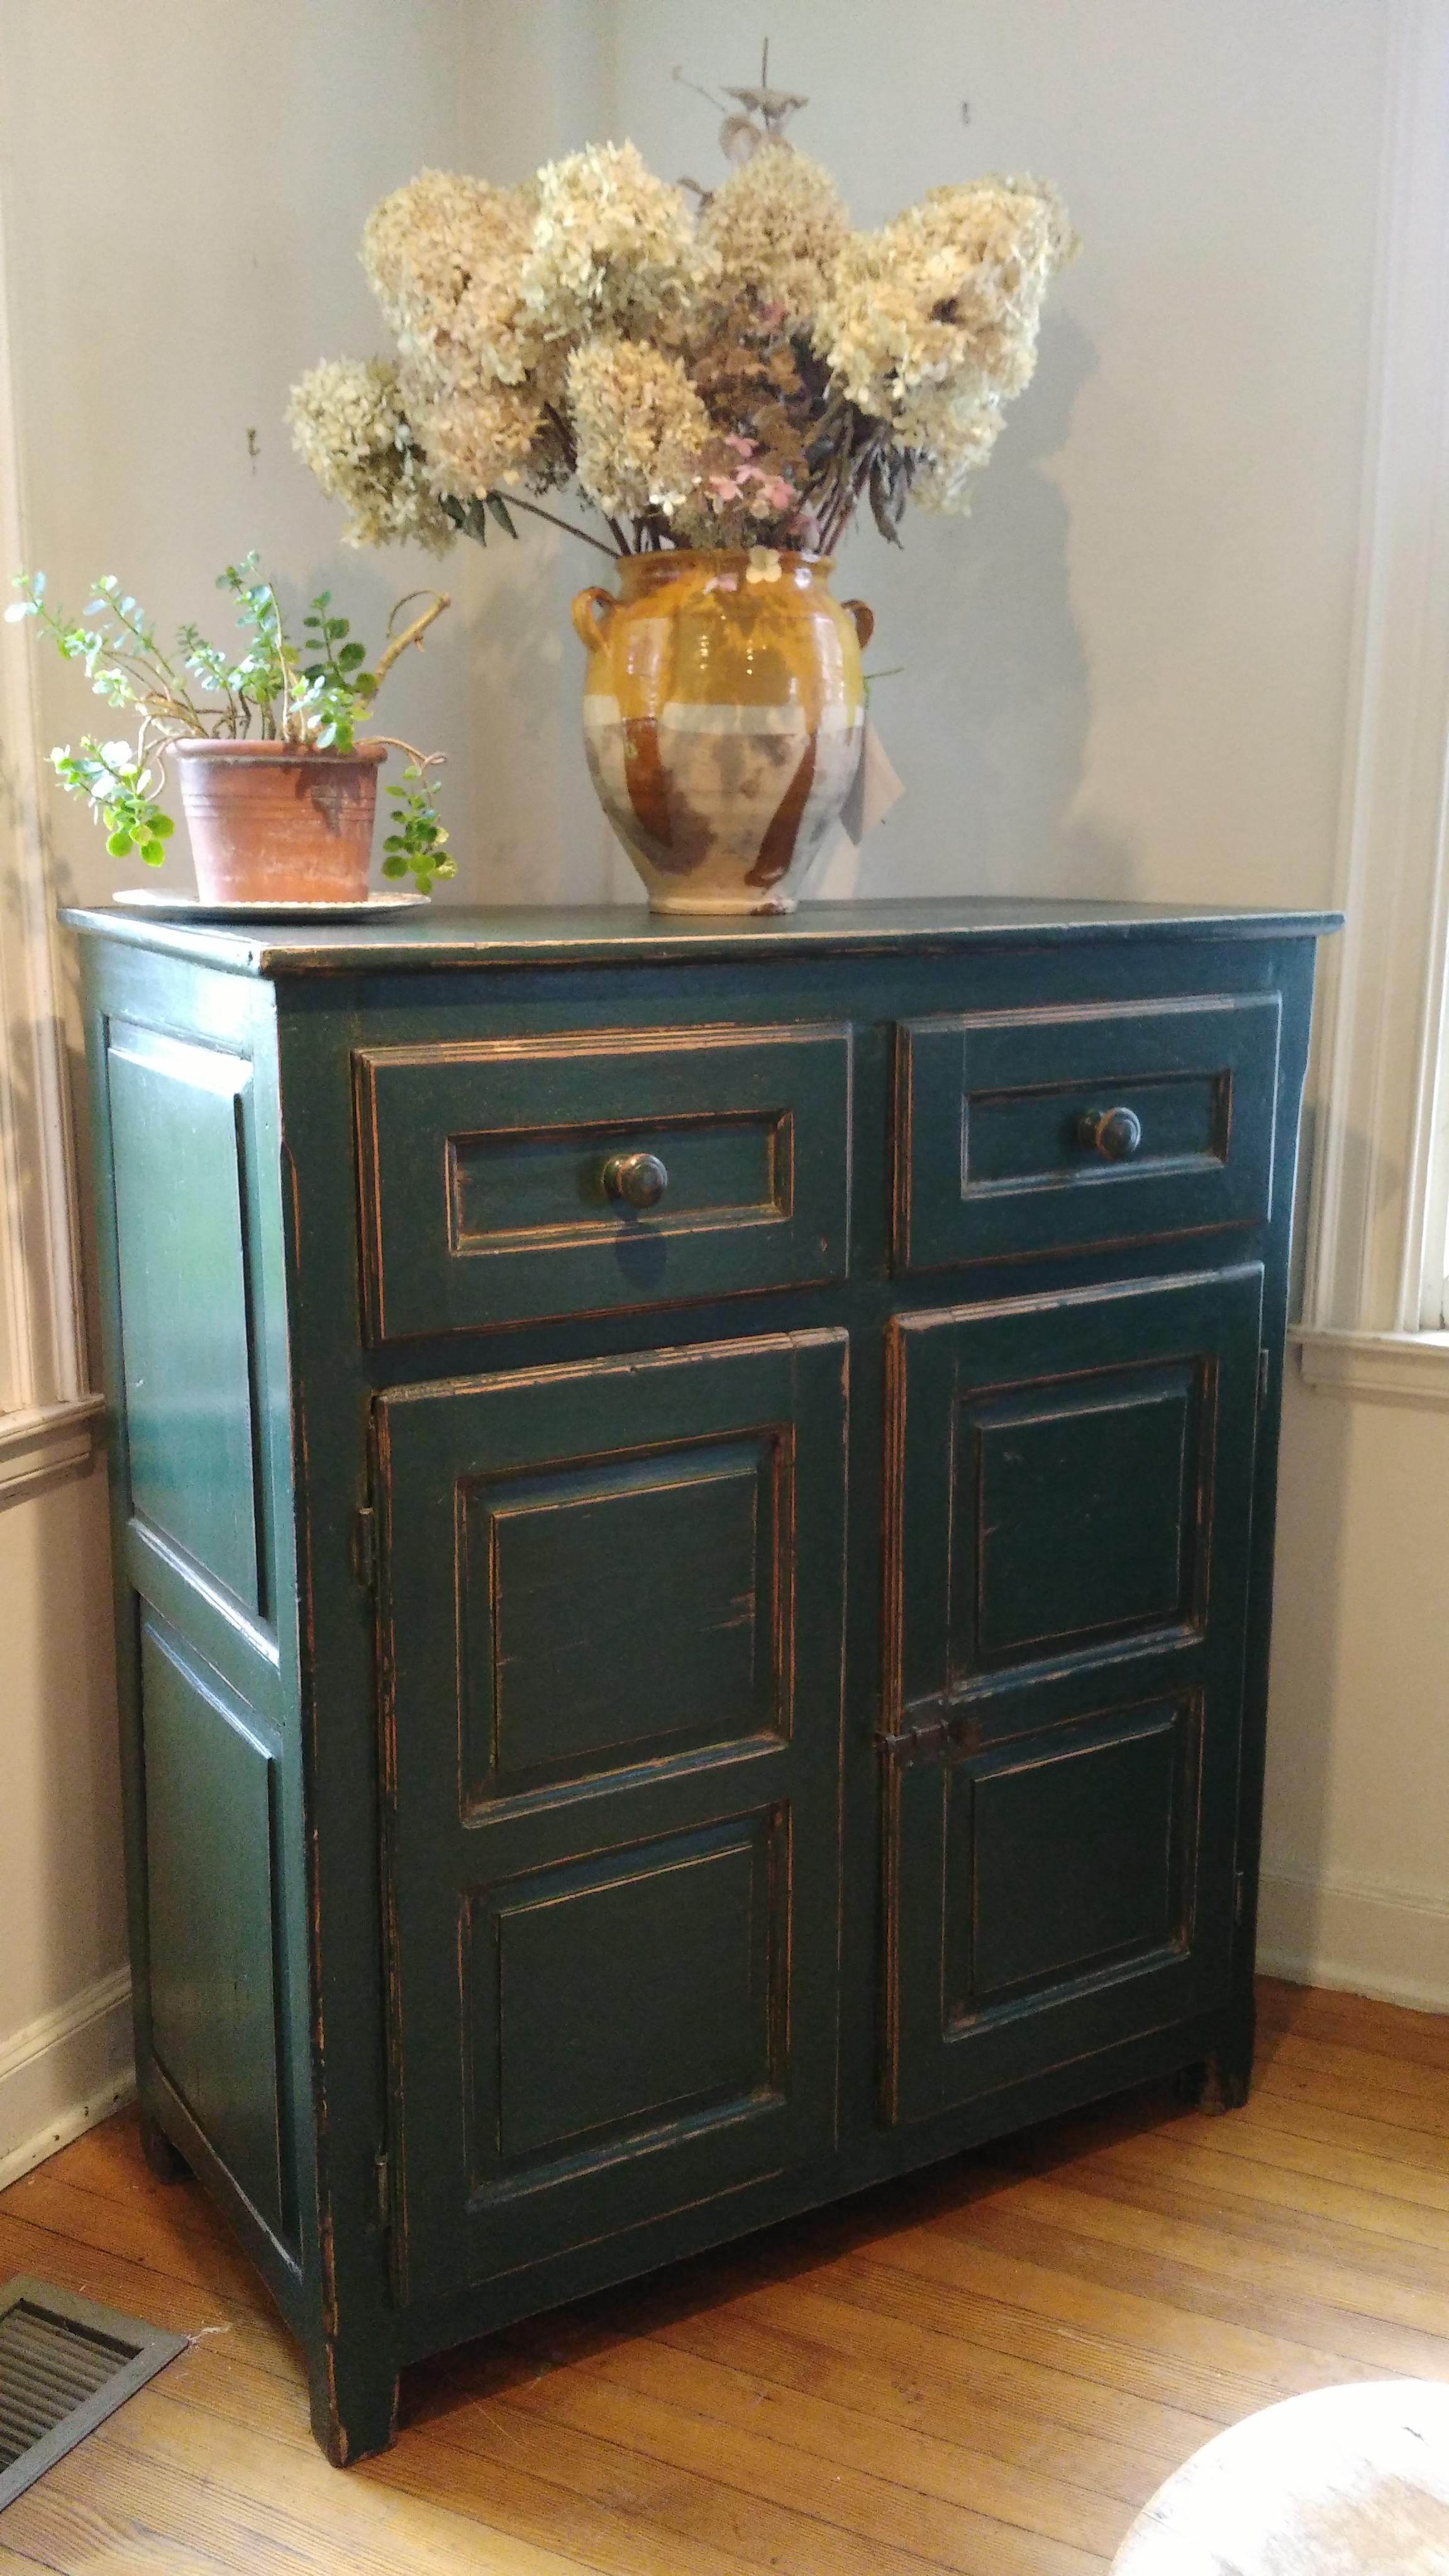 Let's start with the color of this piece: A rich green with paneled sides and front. There is a shelf inside the pine double doors, and a wonderful latch. Add in the two large drawers and you've got a very special Canadian buffet!
   